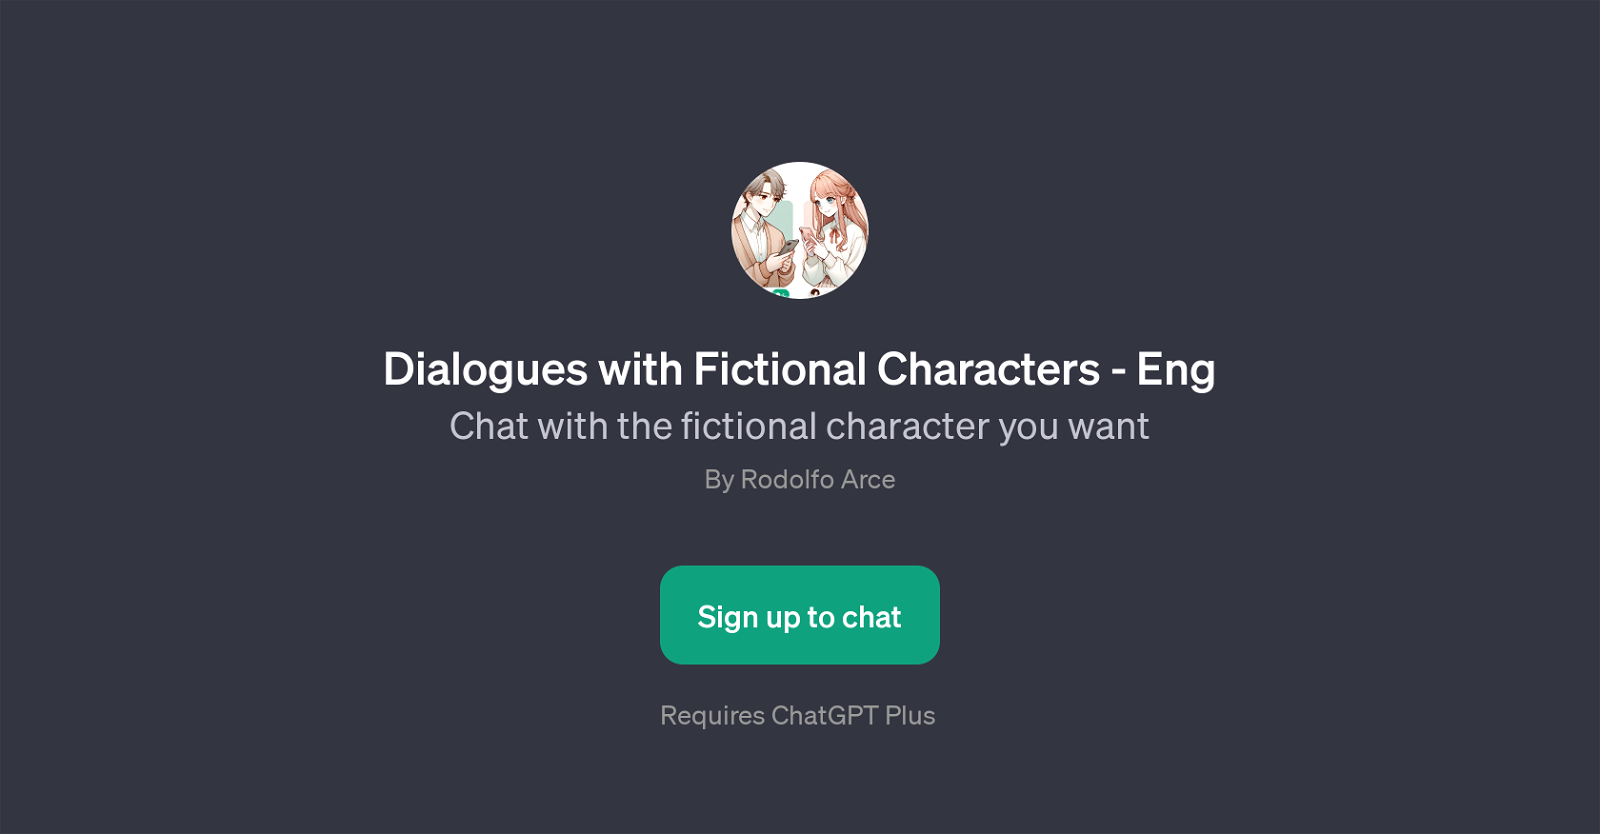 Dialogues with Fictional Characters - Eng website